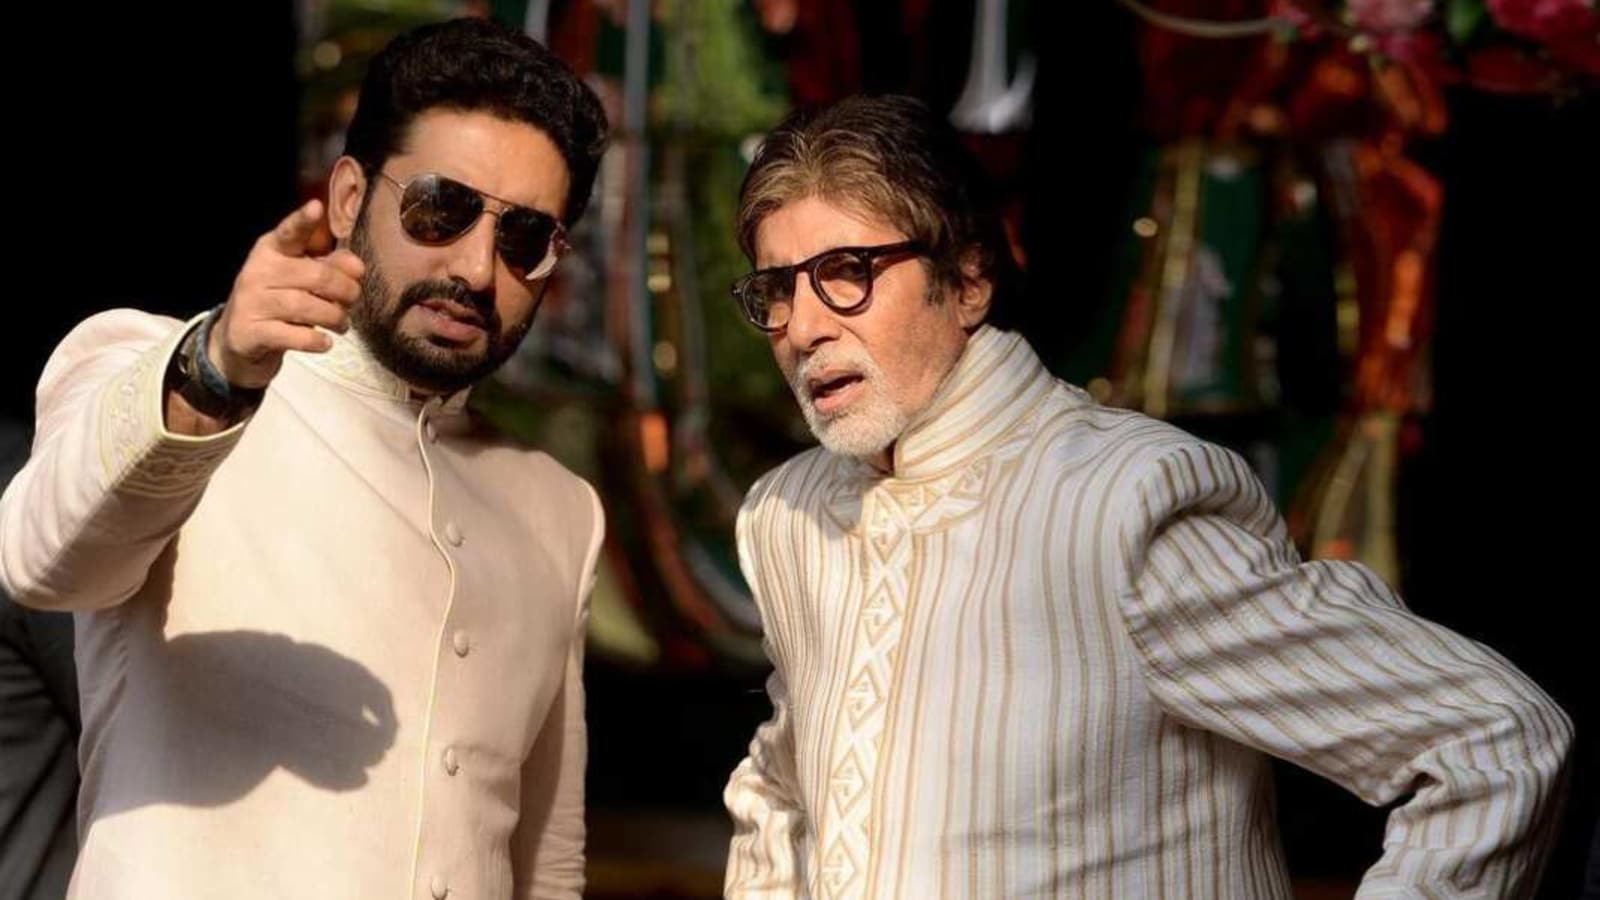 Amitabh Bachchan shares pic with son Abhishek, talks about how he has  become his friend | Bollywood - Hindustan Times